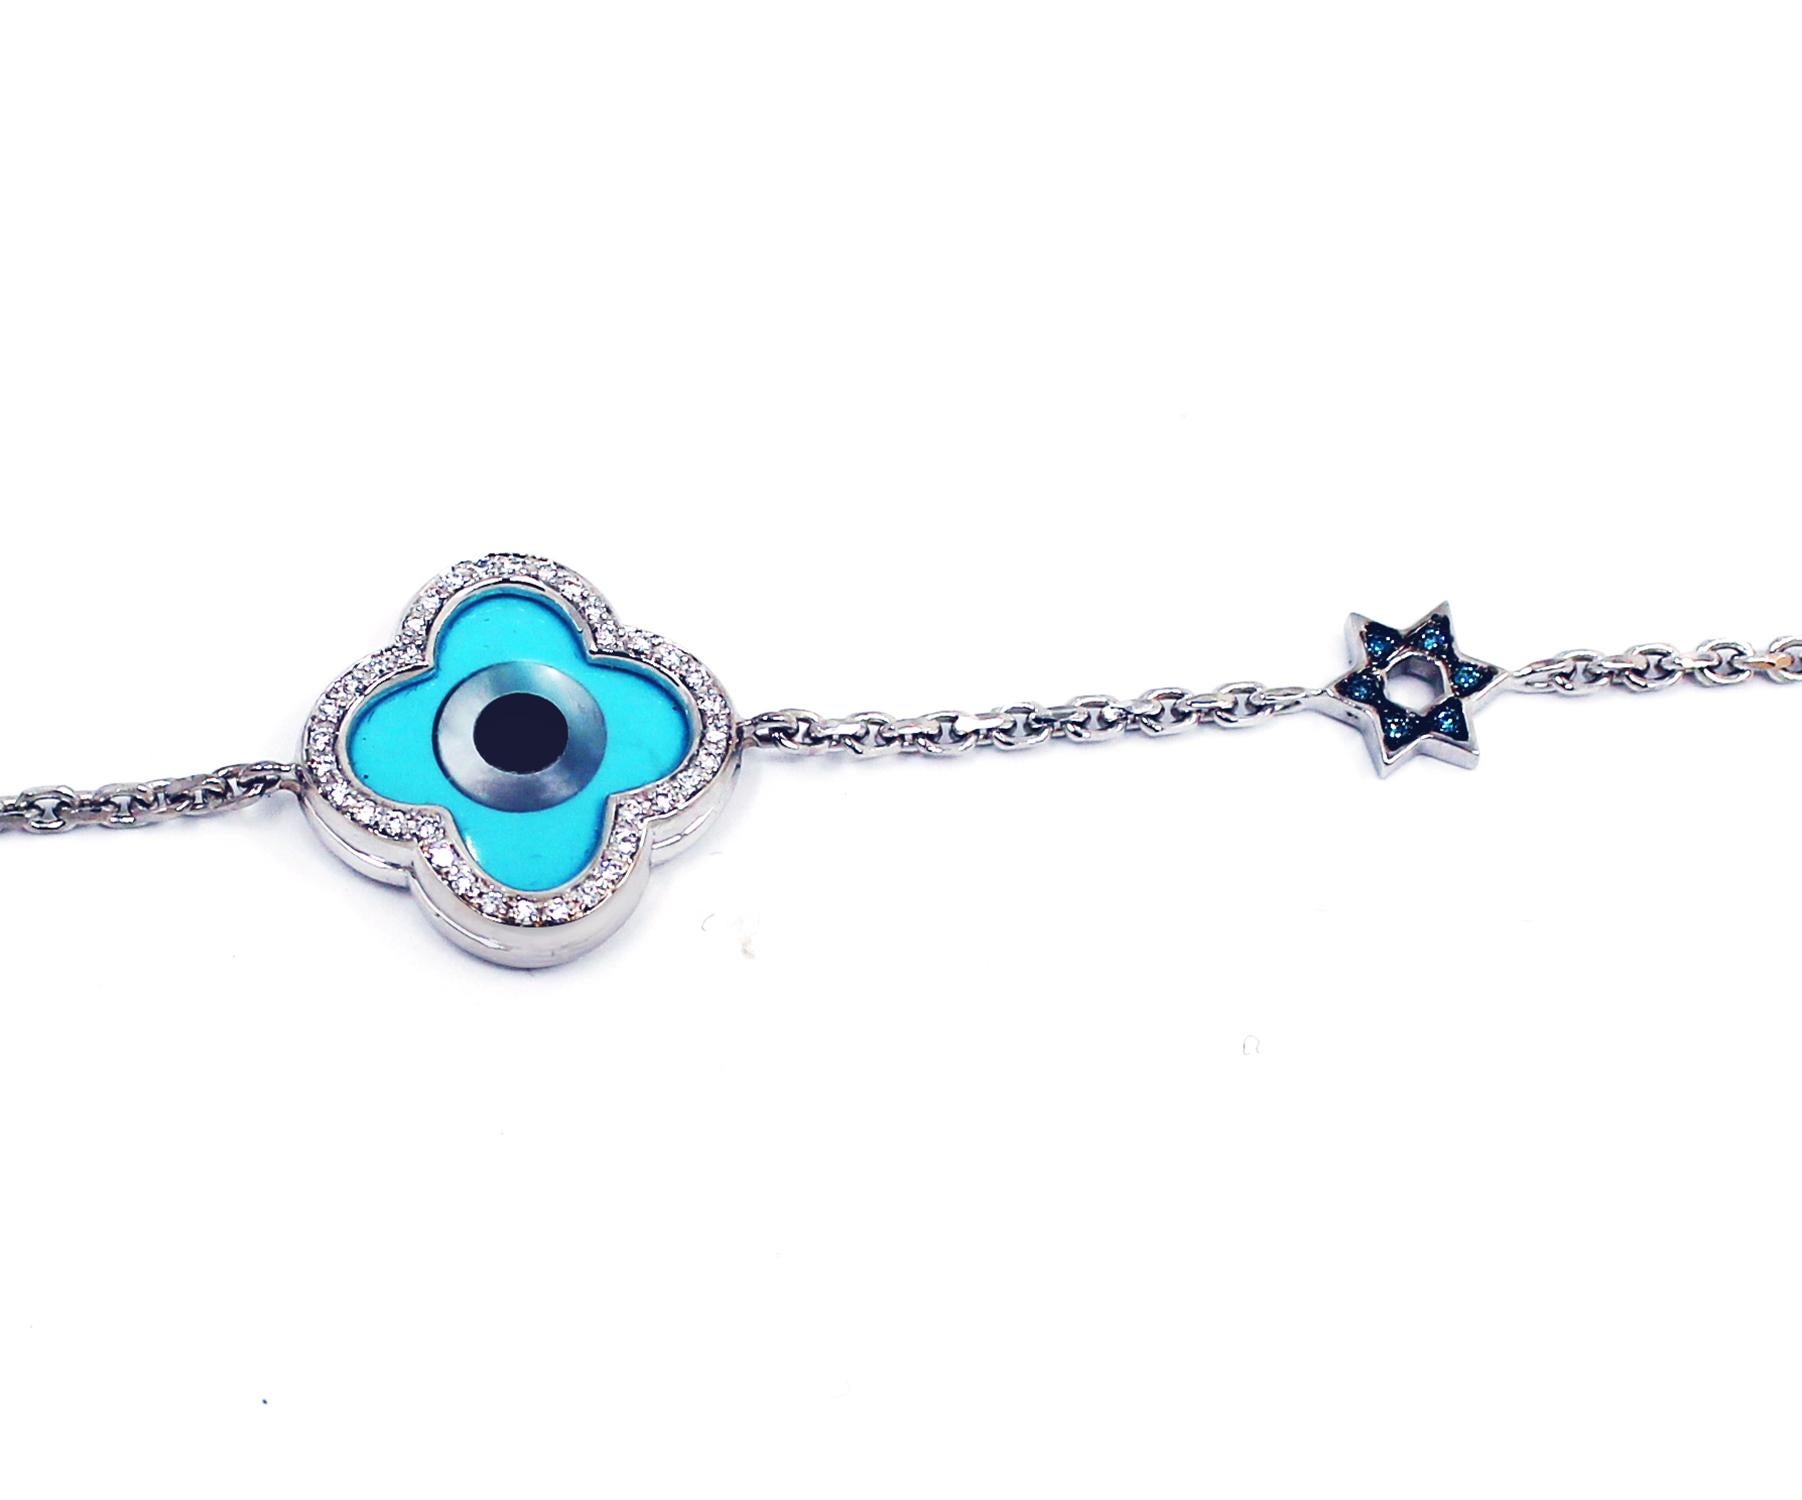 The myth of the evil eye has intrigued people for thousands of years! Believed the bring the wearer good luck, the ‘Evil Eye Collection’ is delightfully handcrafted in 18 carat gold with diamonds and turquoise inlay, reminiscent of the Greek